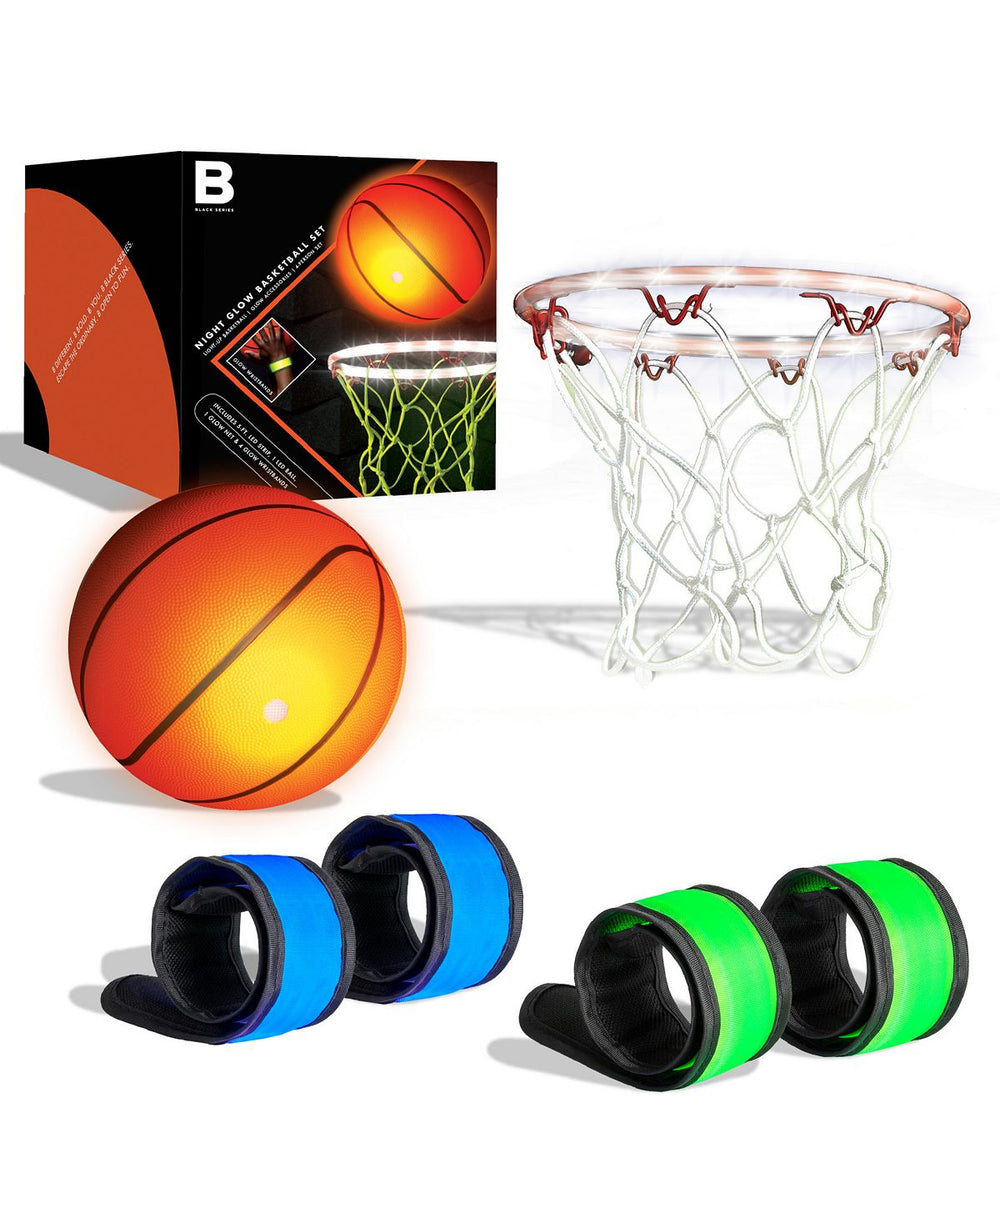 Black Series LED Night Glow Basketball Set with Light-Up Rim and Wristbands